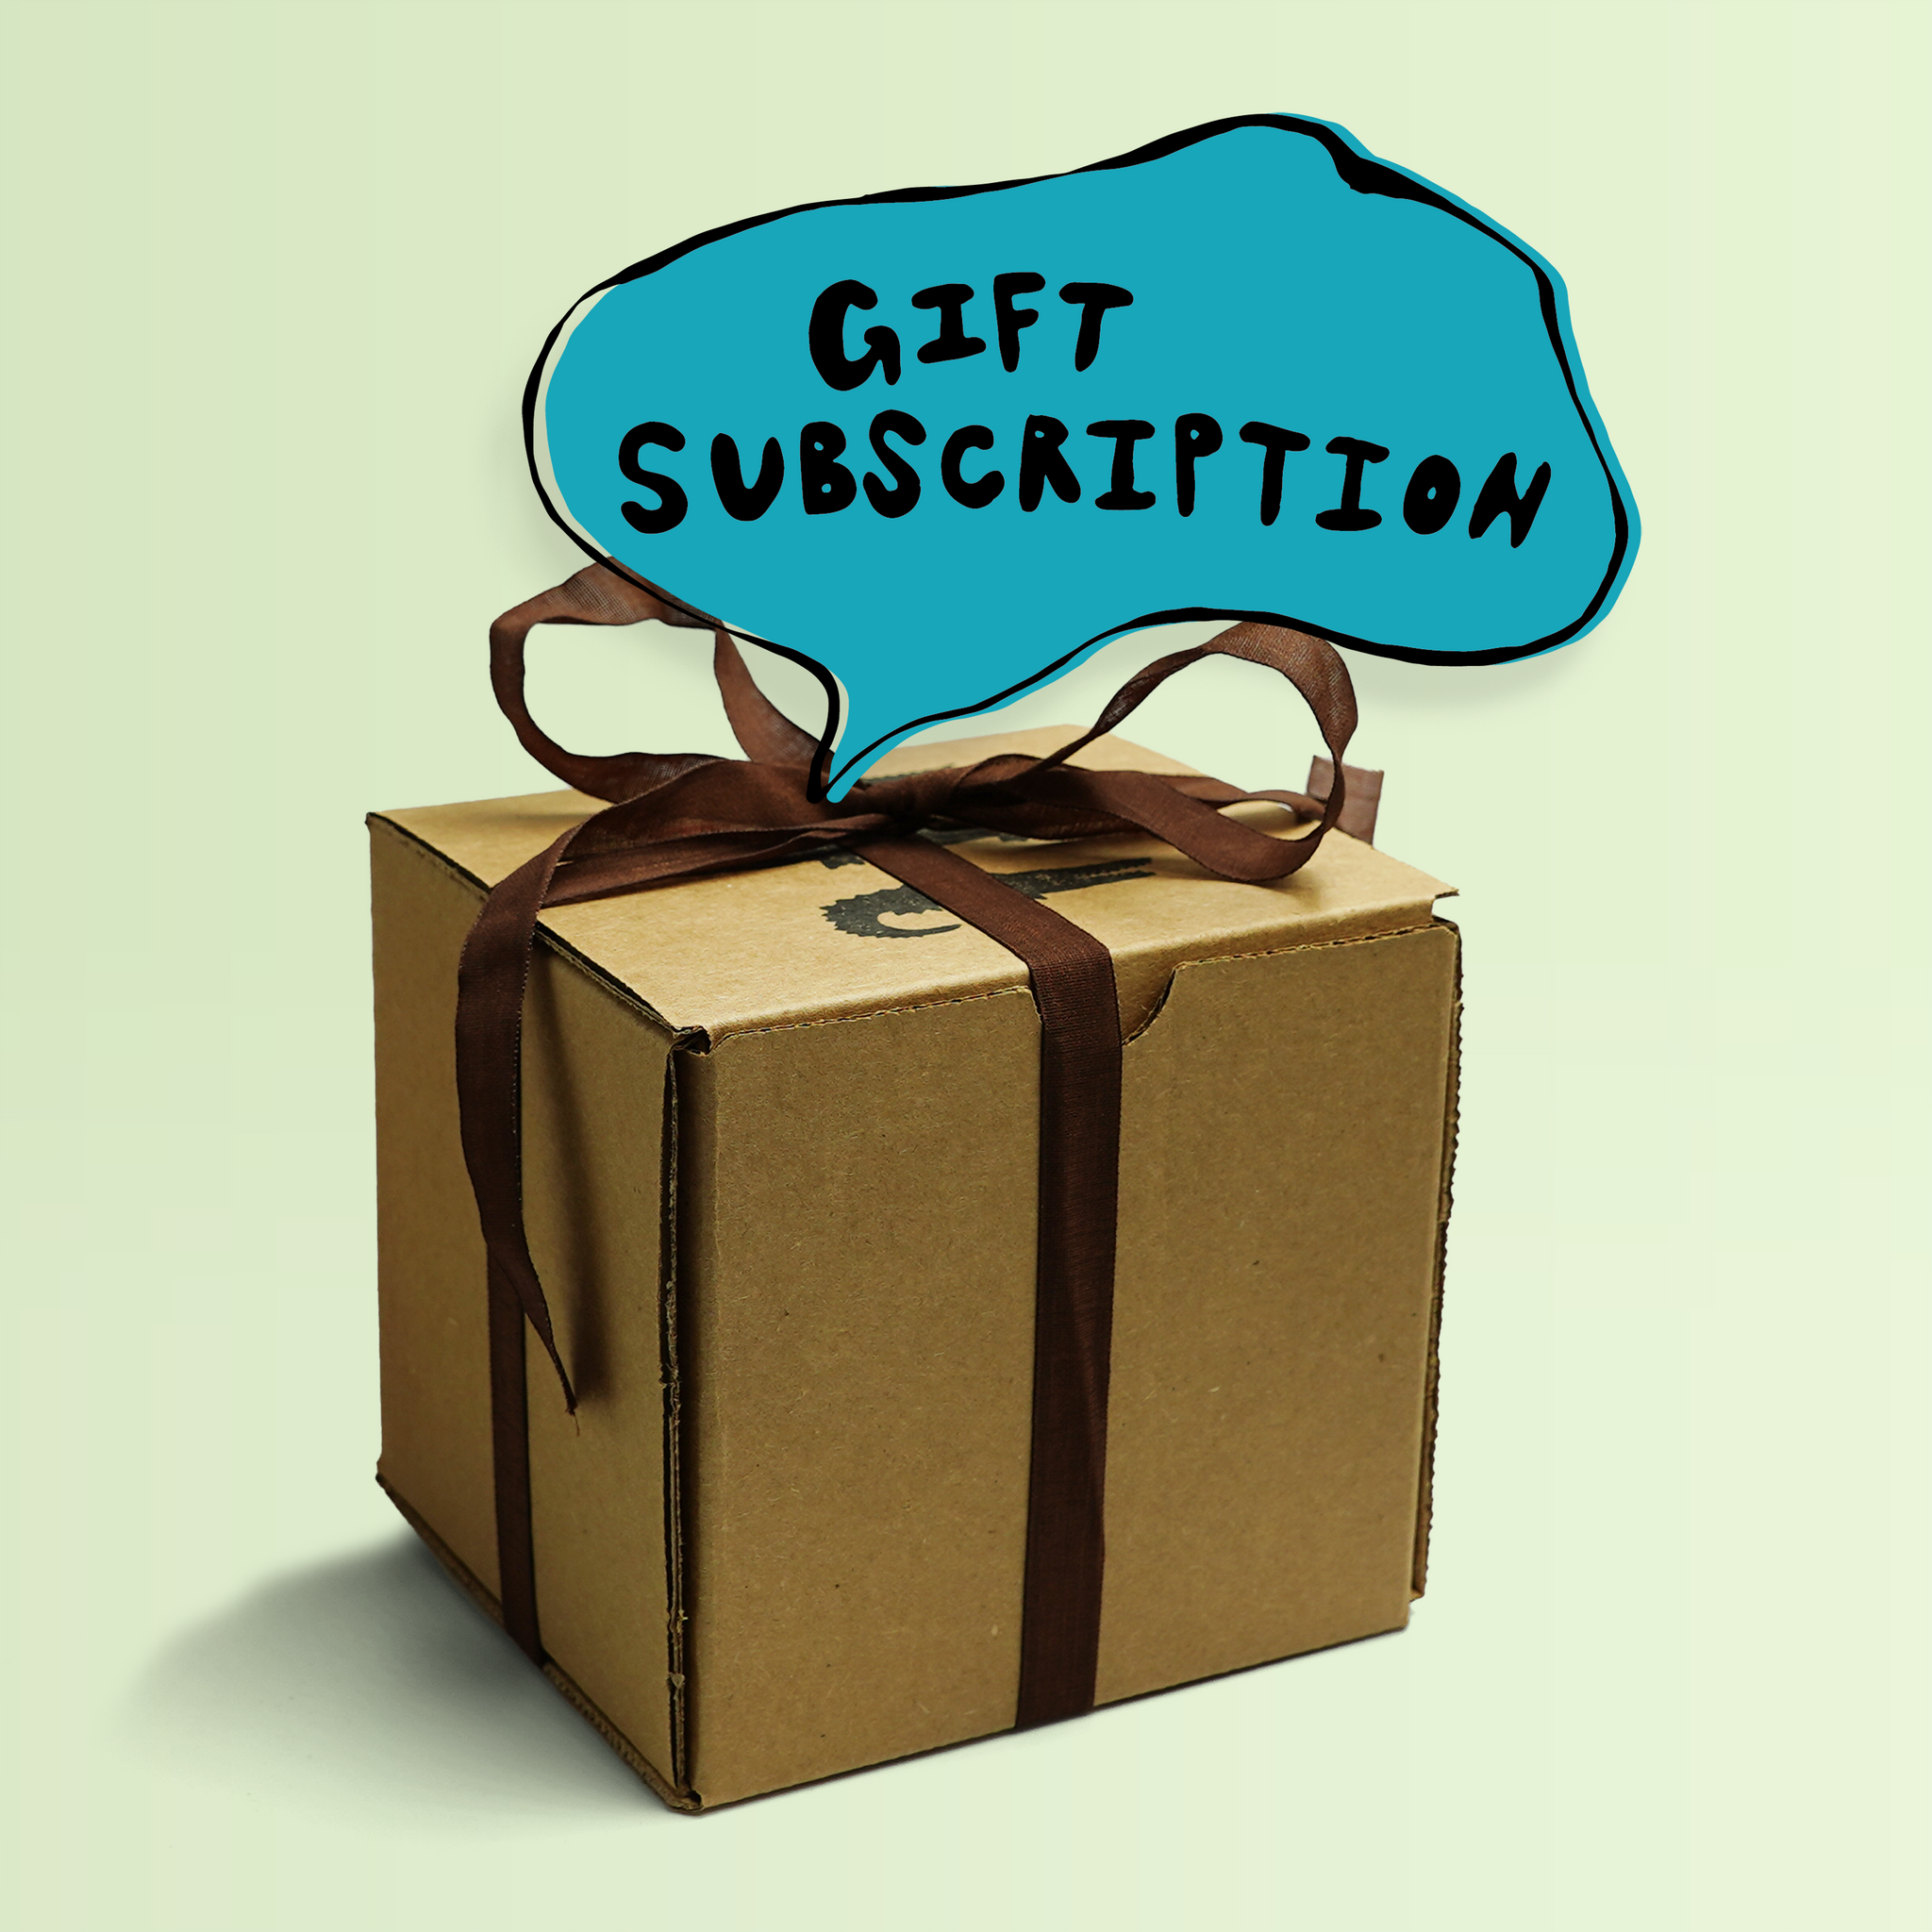 Gift Subscription 6 month